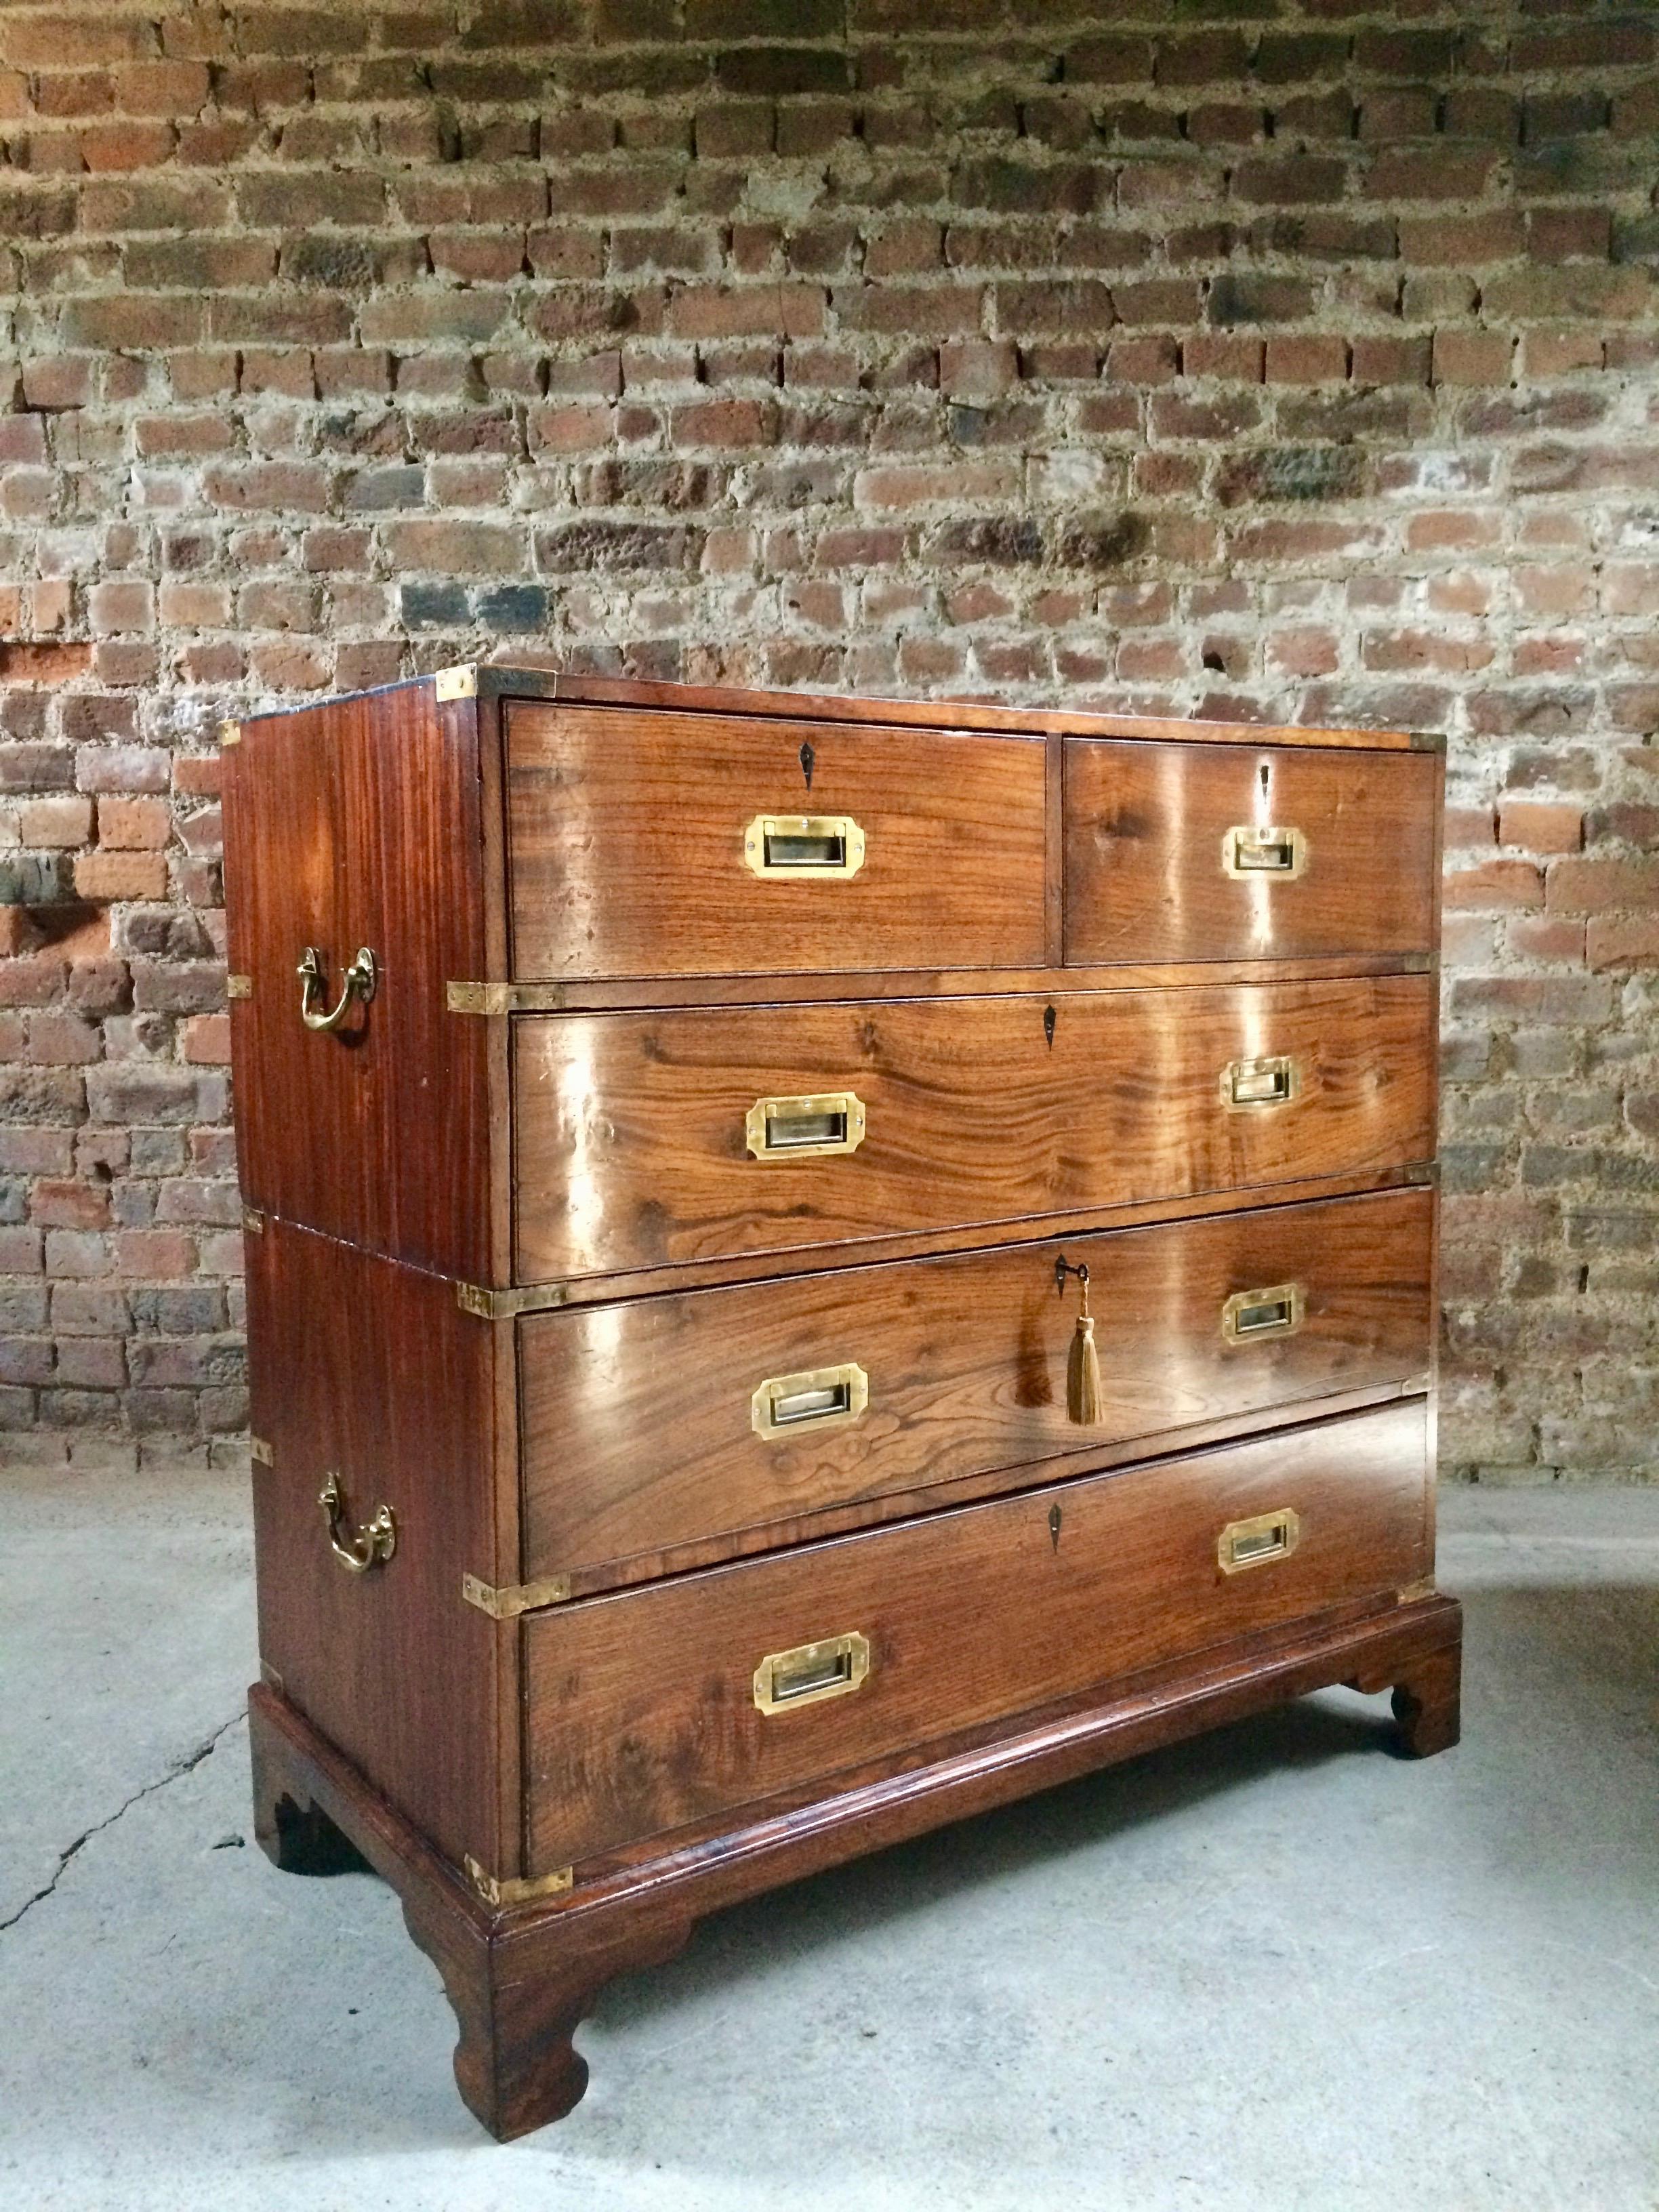 Antique Campaign Chest of Drawers Dresser Mahogany circa 1860 Victorian No.4 In Excellent Condition In Longdon, Tewkesbury